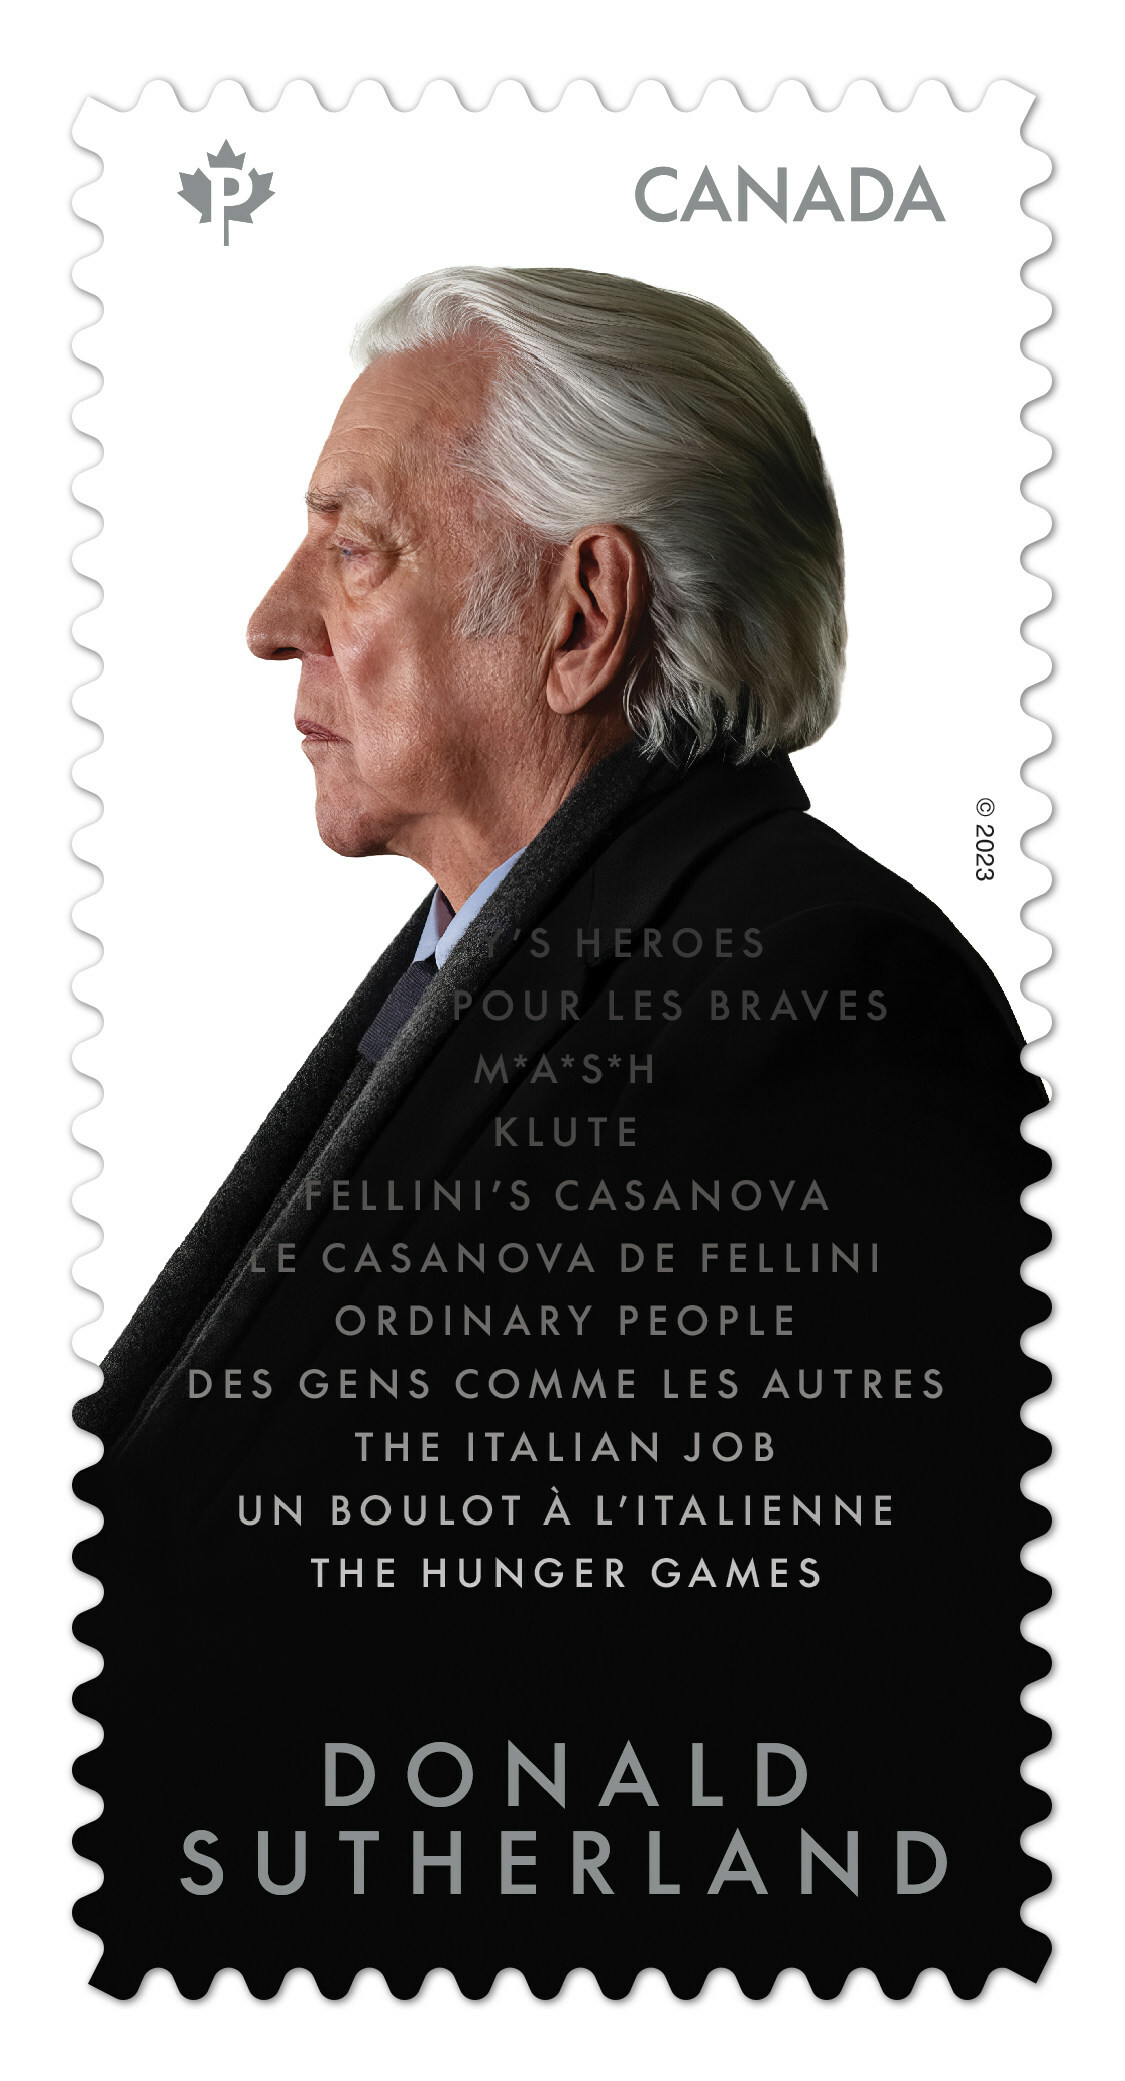 Actor Donald Sutherland face of new Canada Post stamp Broadcast Dialogue